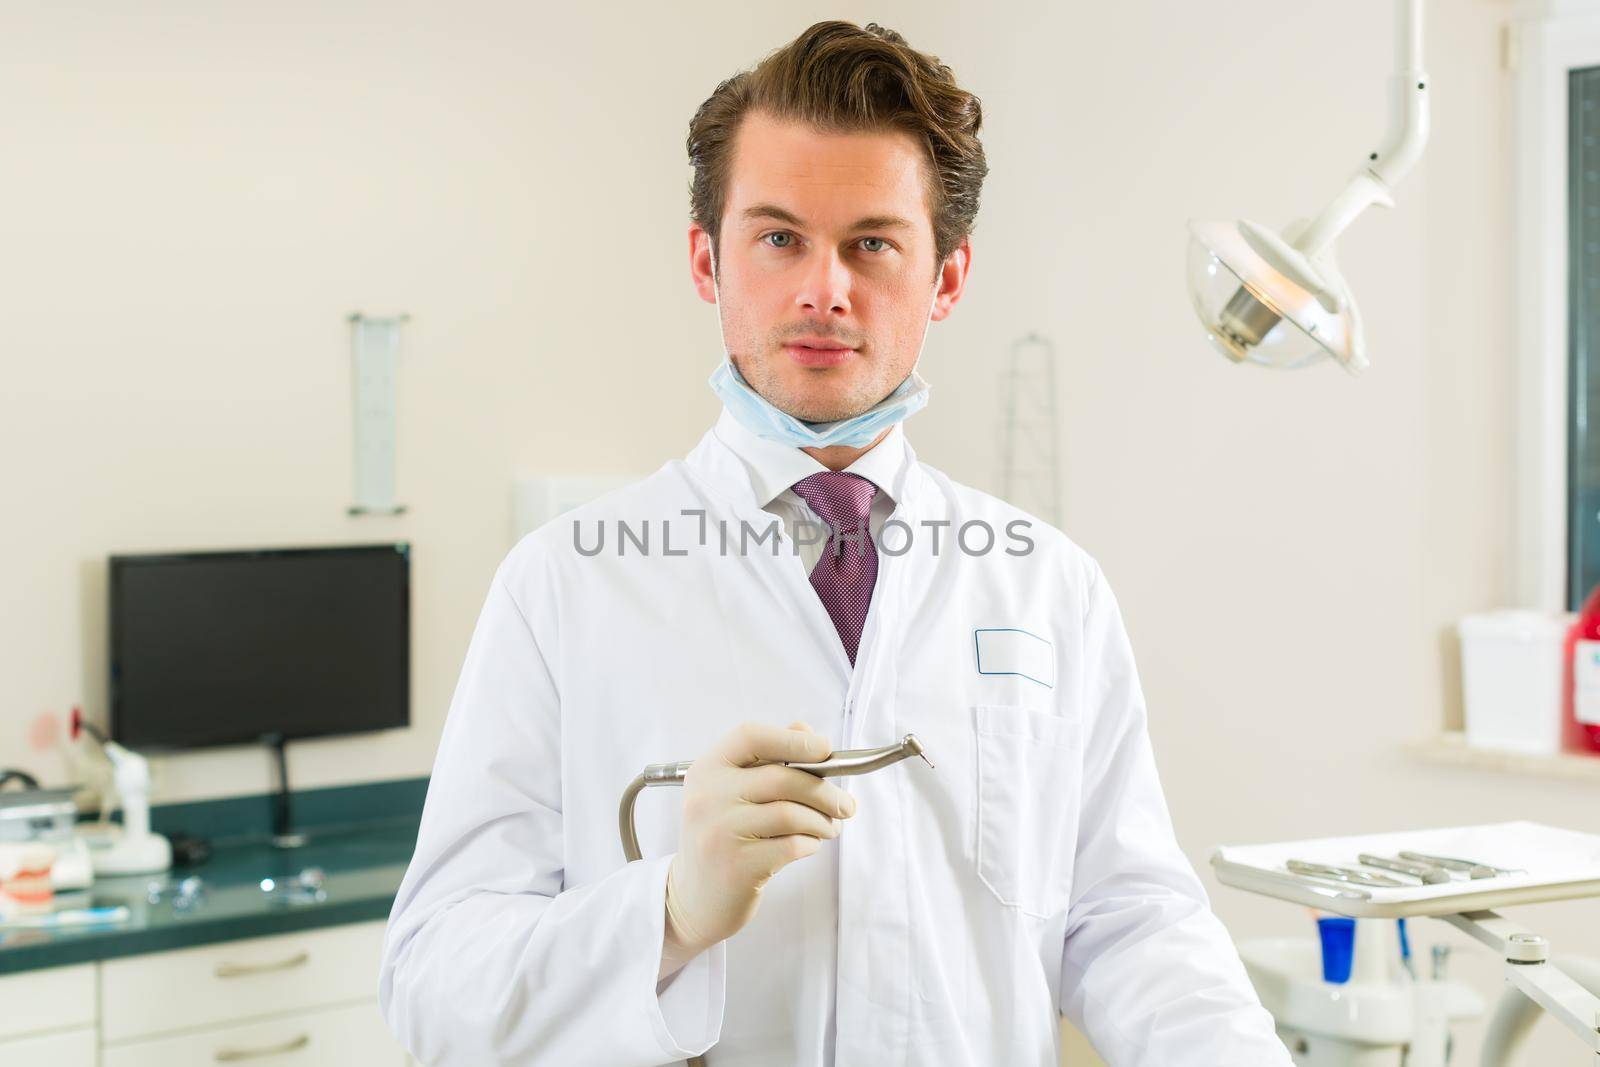 Dentists in his surgery holds a drill and looking at the viewer, in the background are tools for a dentist